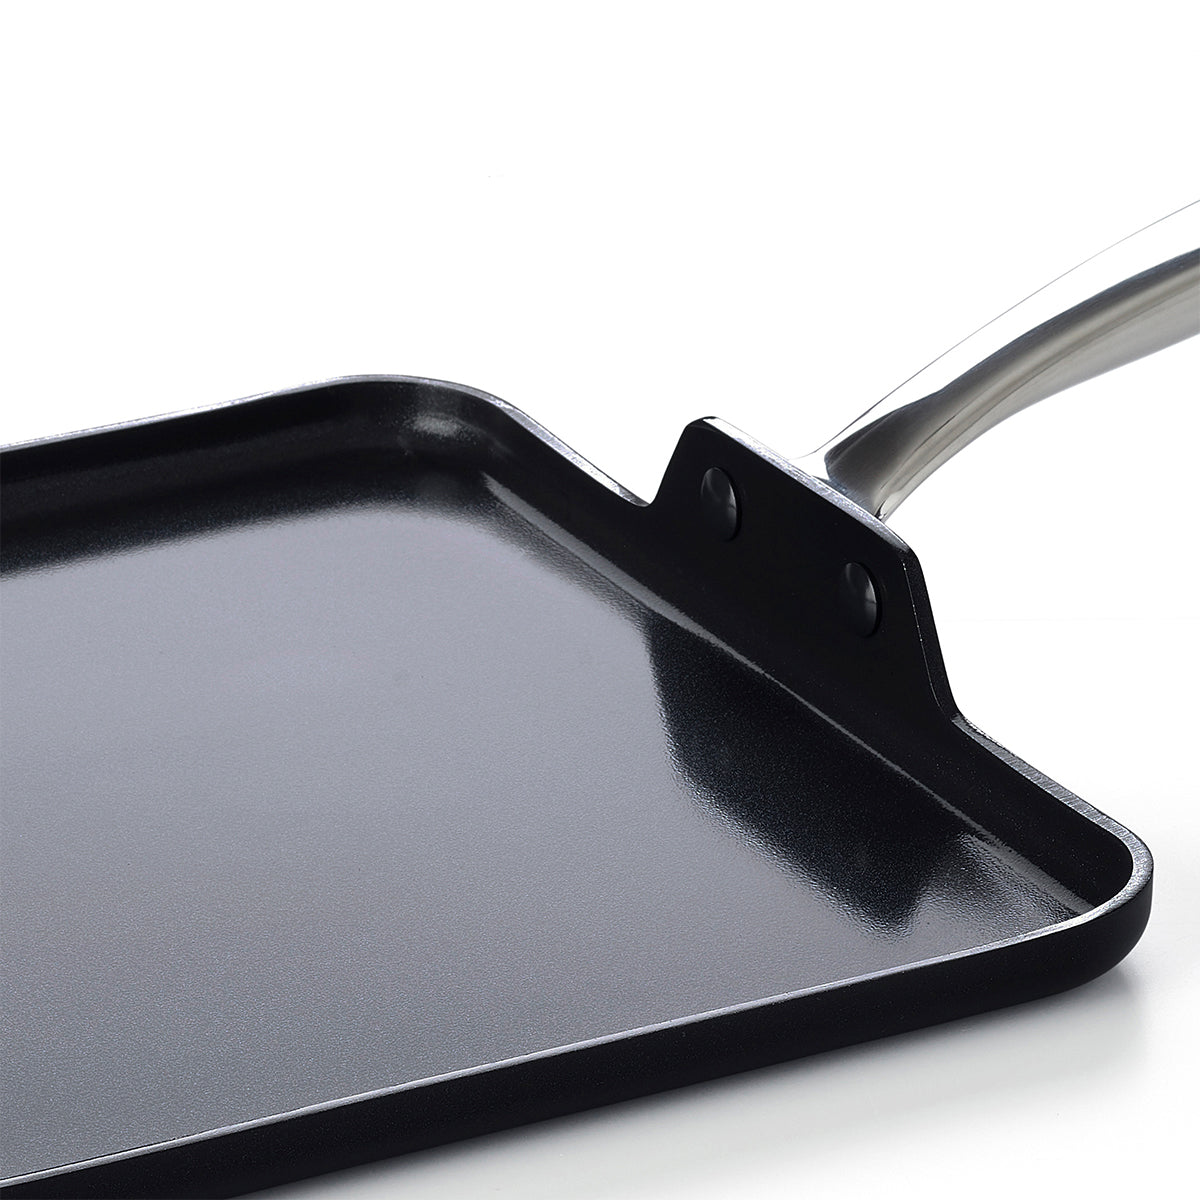 Cooks Standard Hard Anodized Nonstick Square Griddle Pan, 11 x 11-Inch,  Black, 11 INCH - City Market